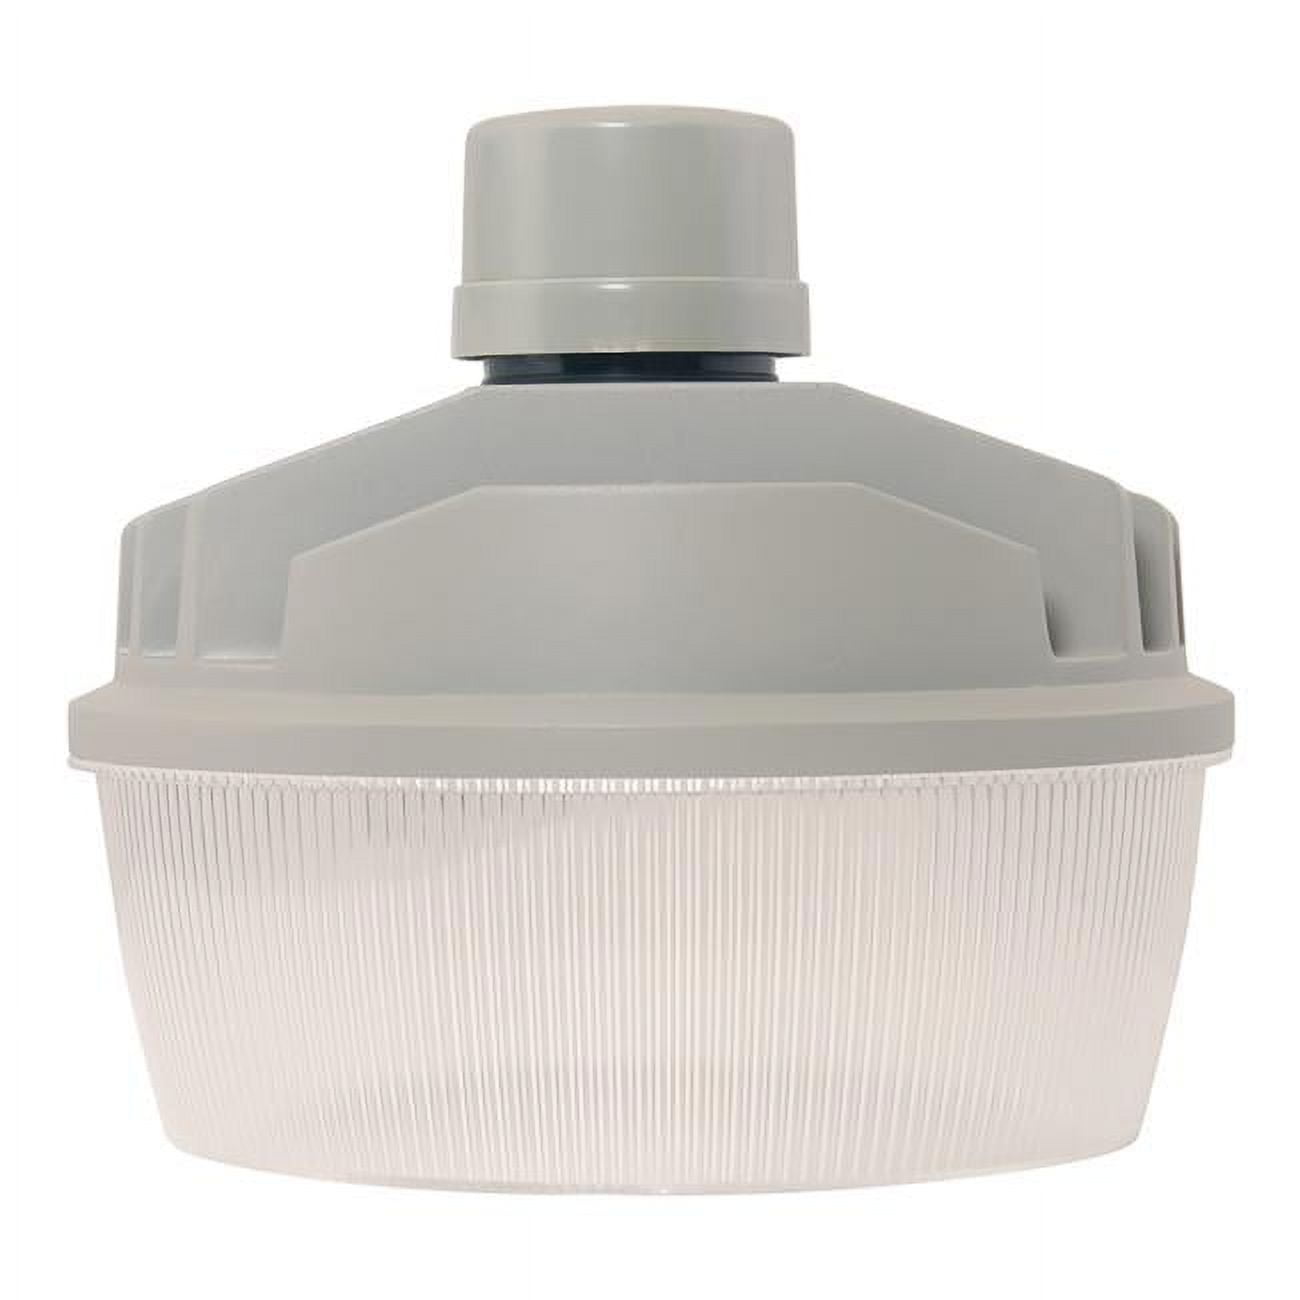 Picture of Halo 3008740 Dusk Dawn Hardwired LED Area Light, Gray